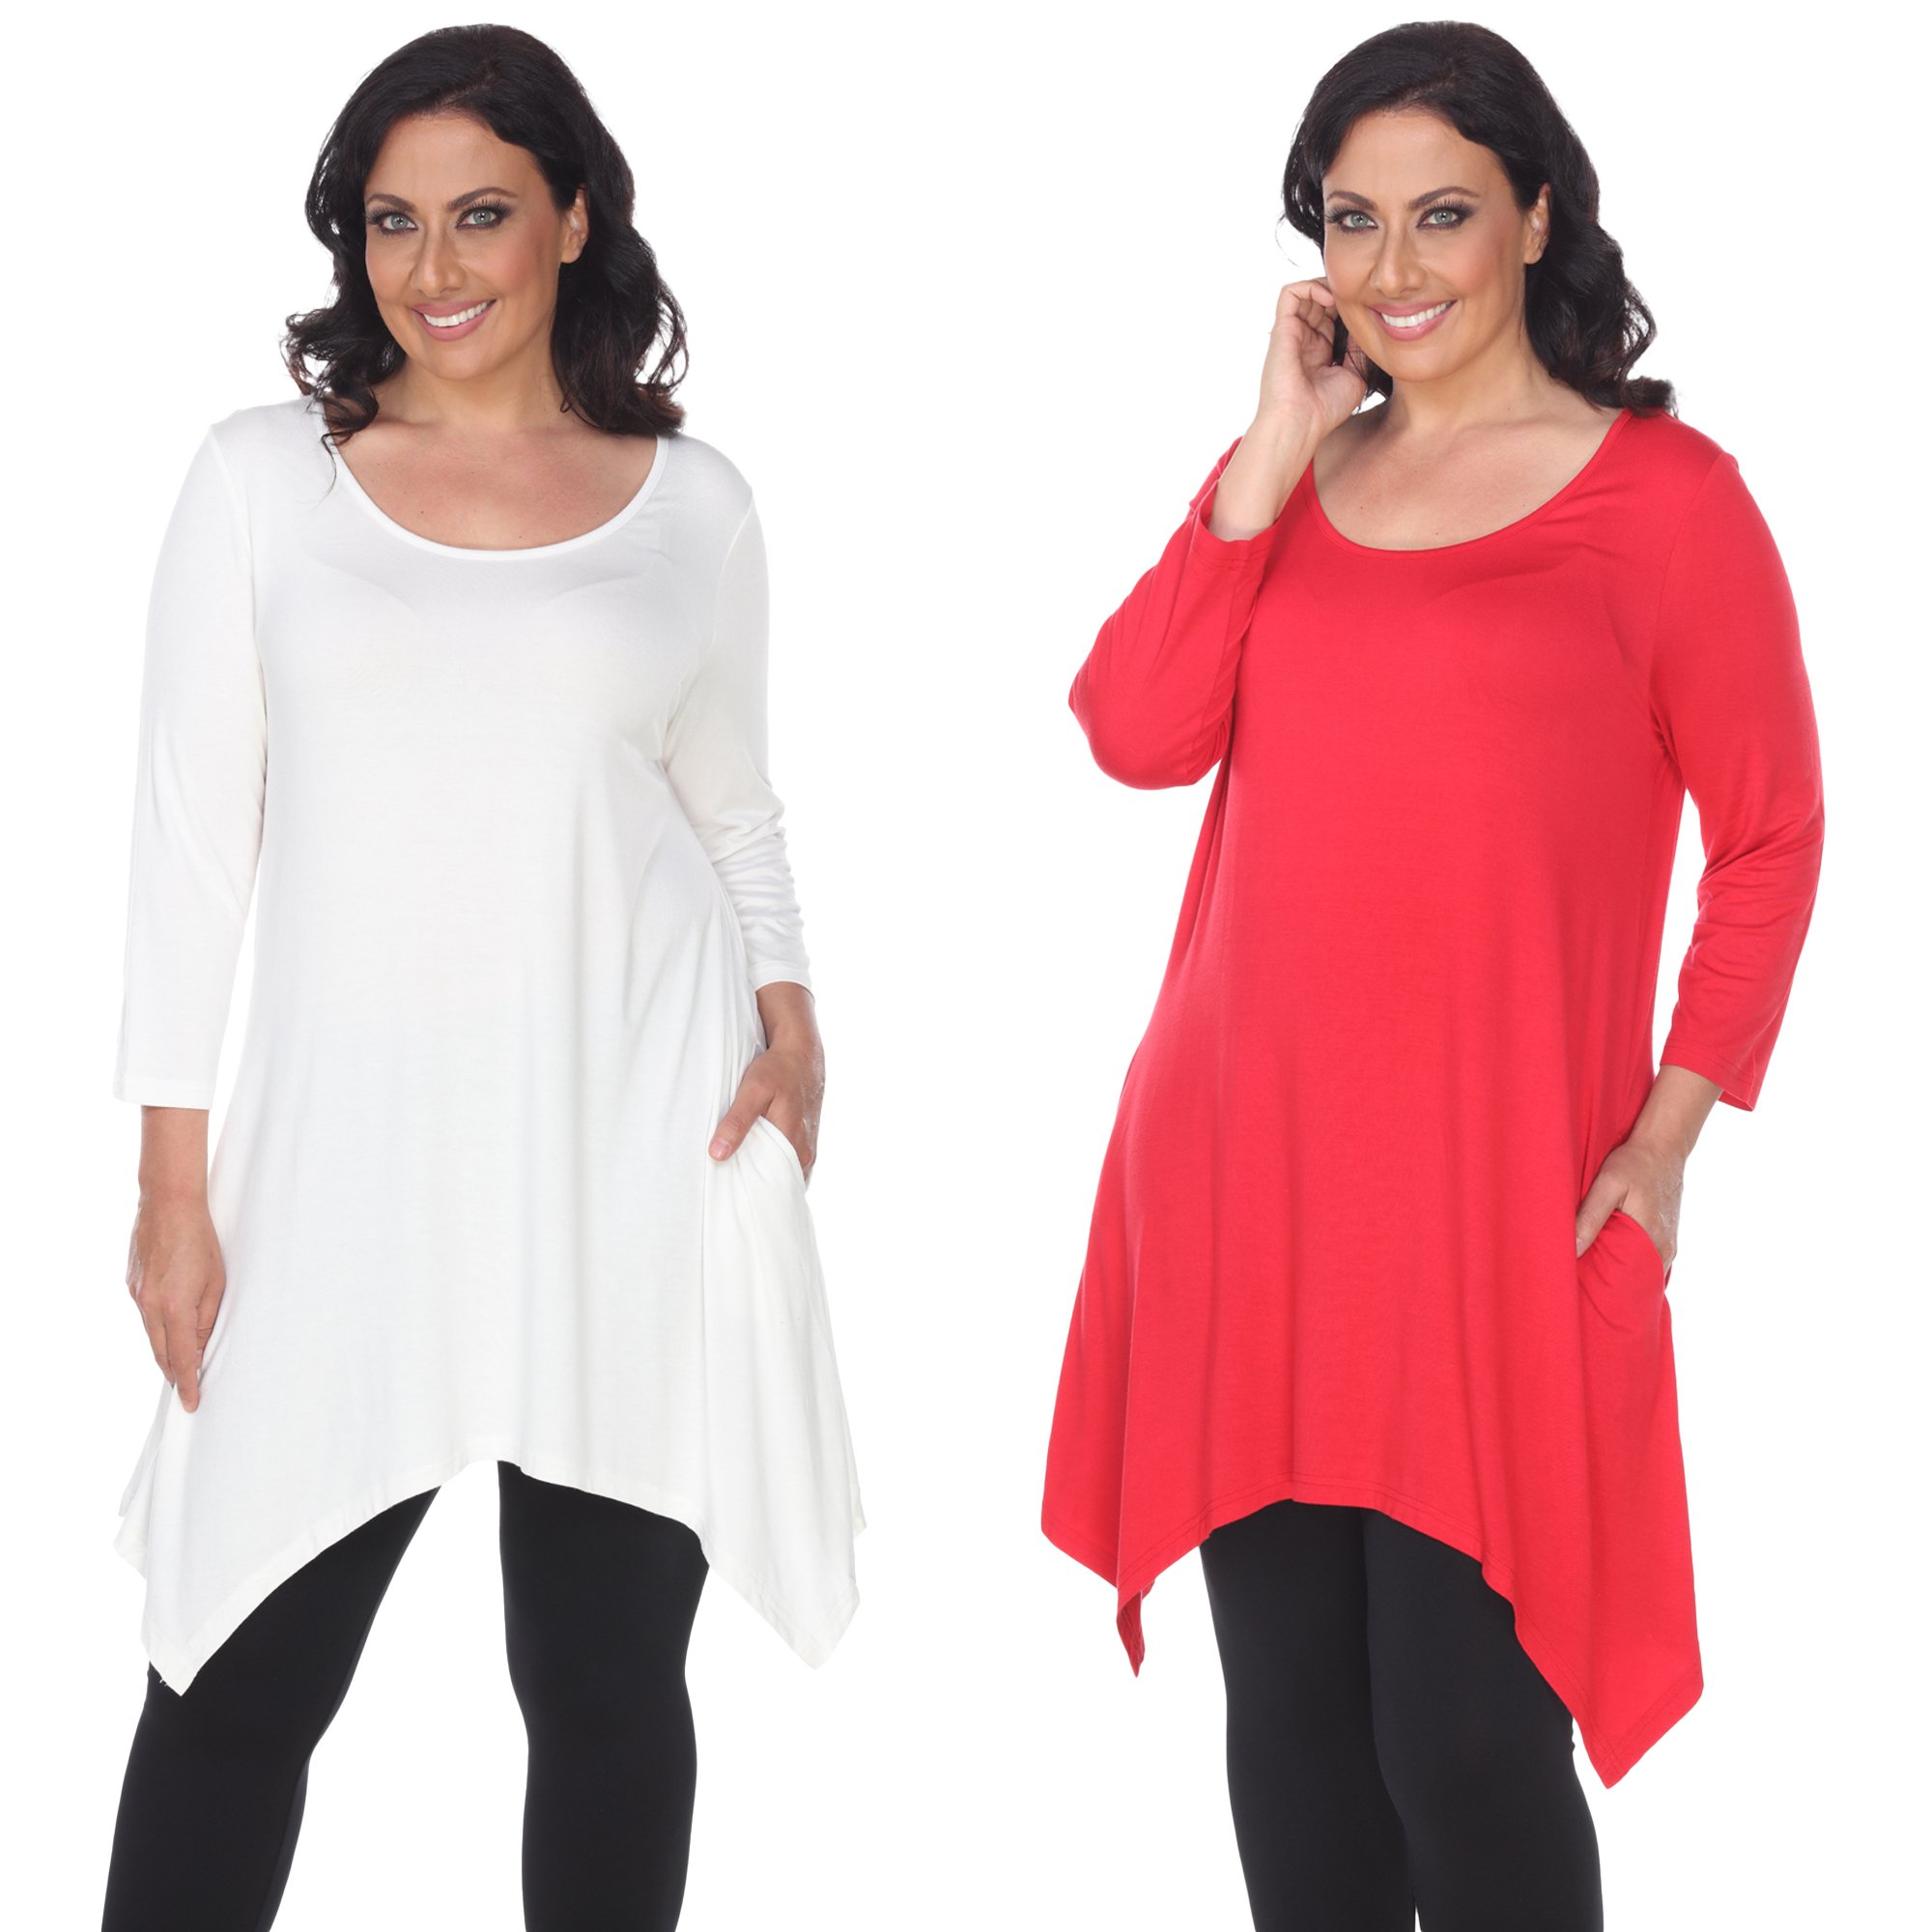 White Mark Women's Pack Of 2 White Tunic Top - White, Coral, Large